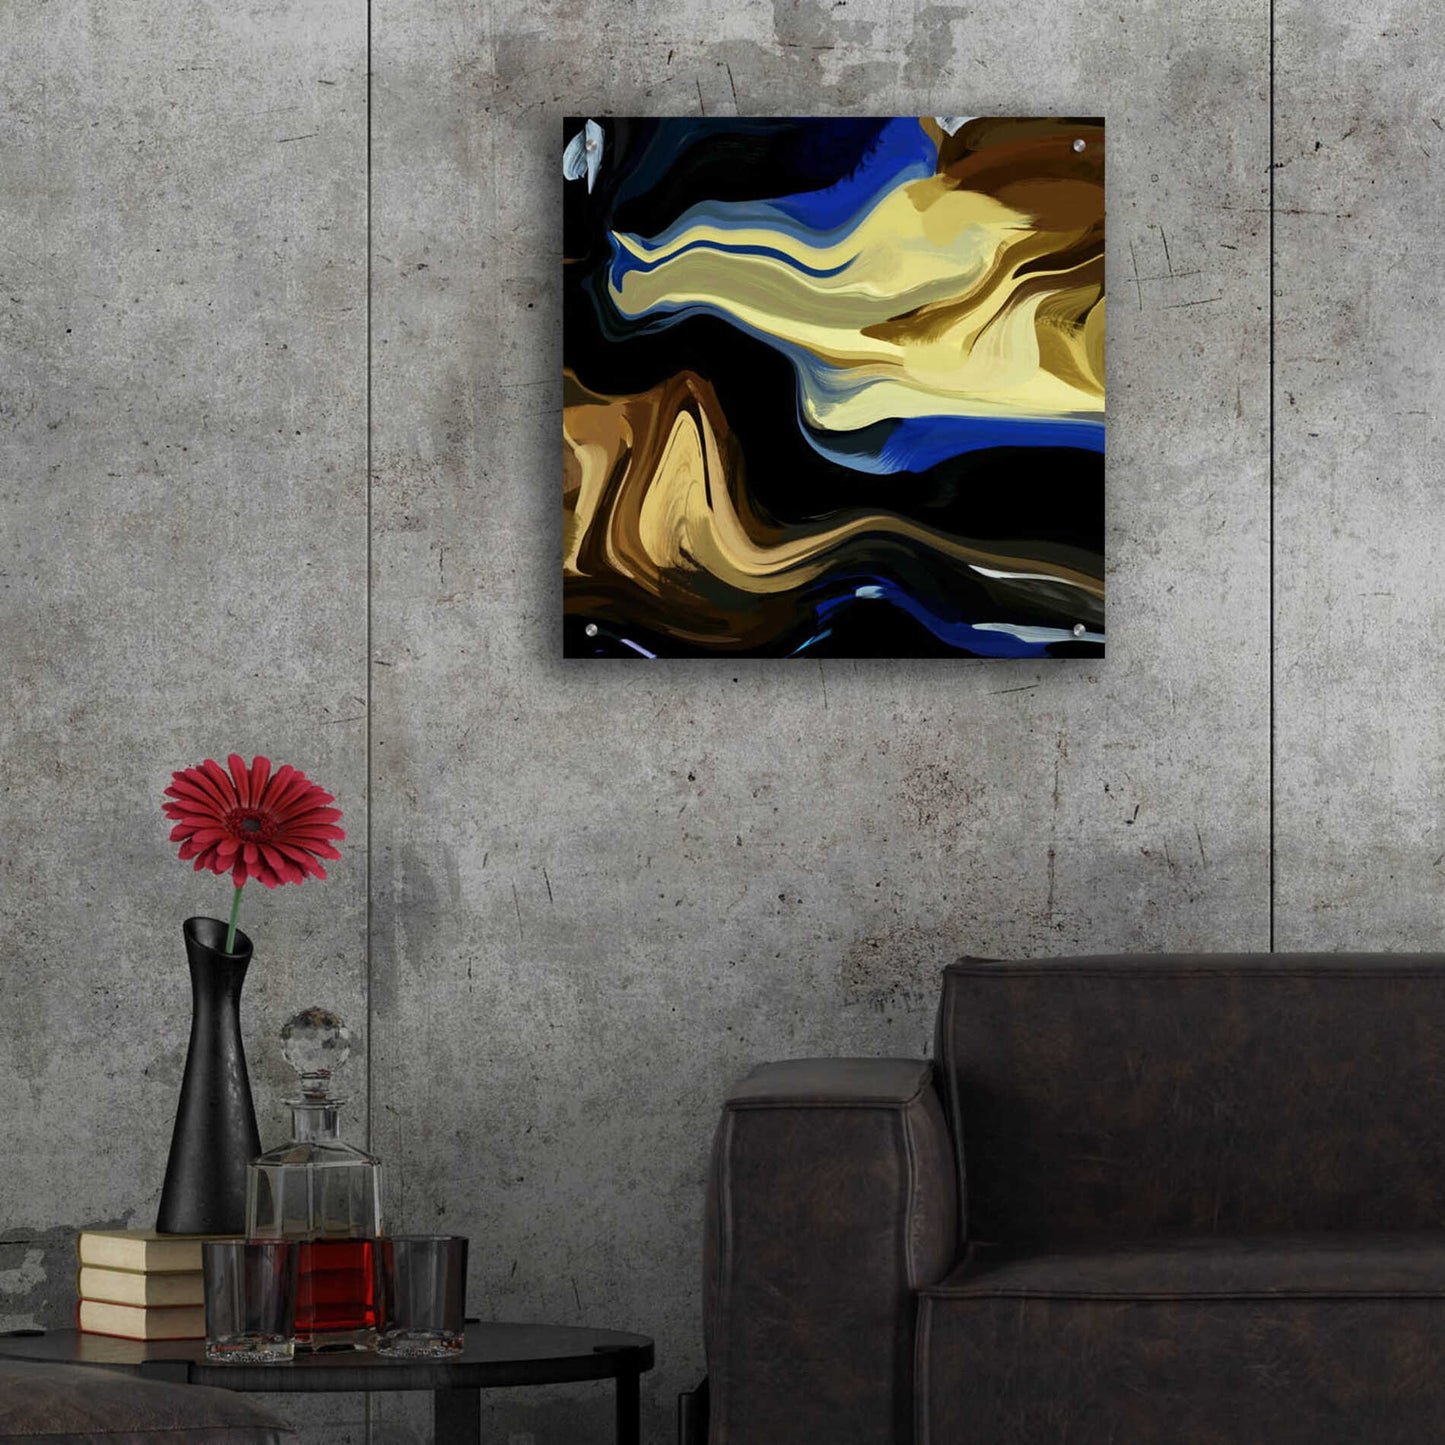 Epic Art 'Inverted Abstract Colorful Flows 16' by Irena Orlov Acrylic Glass Wall Art,24x24